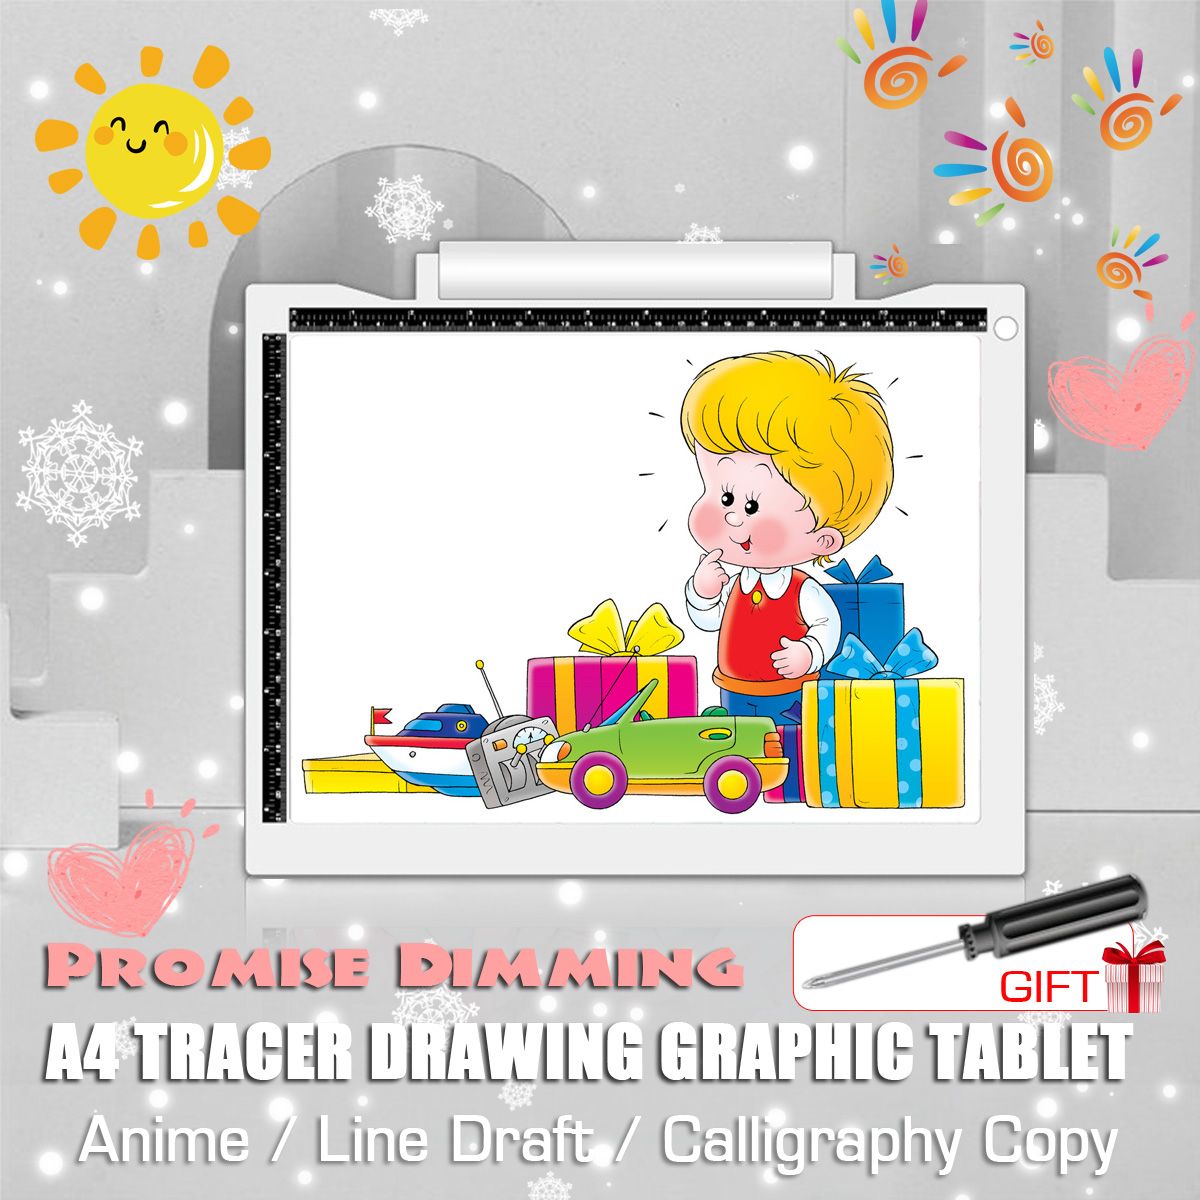 A4-LED-Writing-Painting-Light-Box-Tracing-Board-Copy-Pads-Drawing-Digital-Tablet-1679736